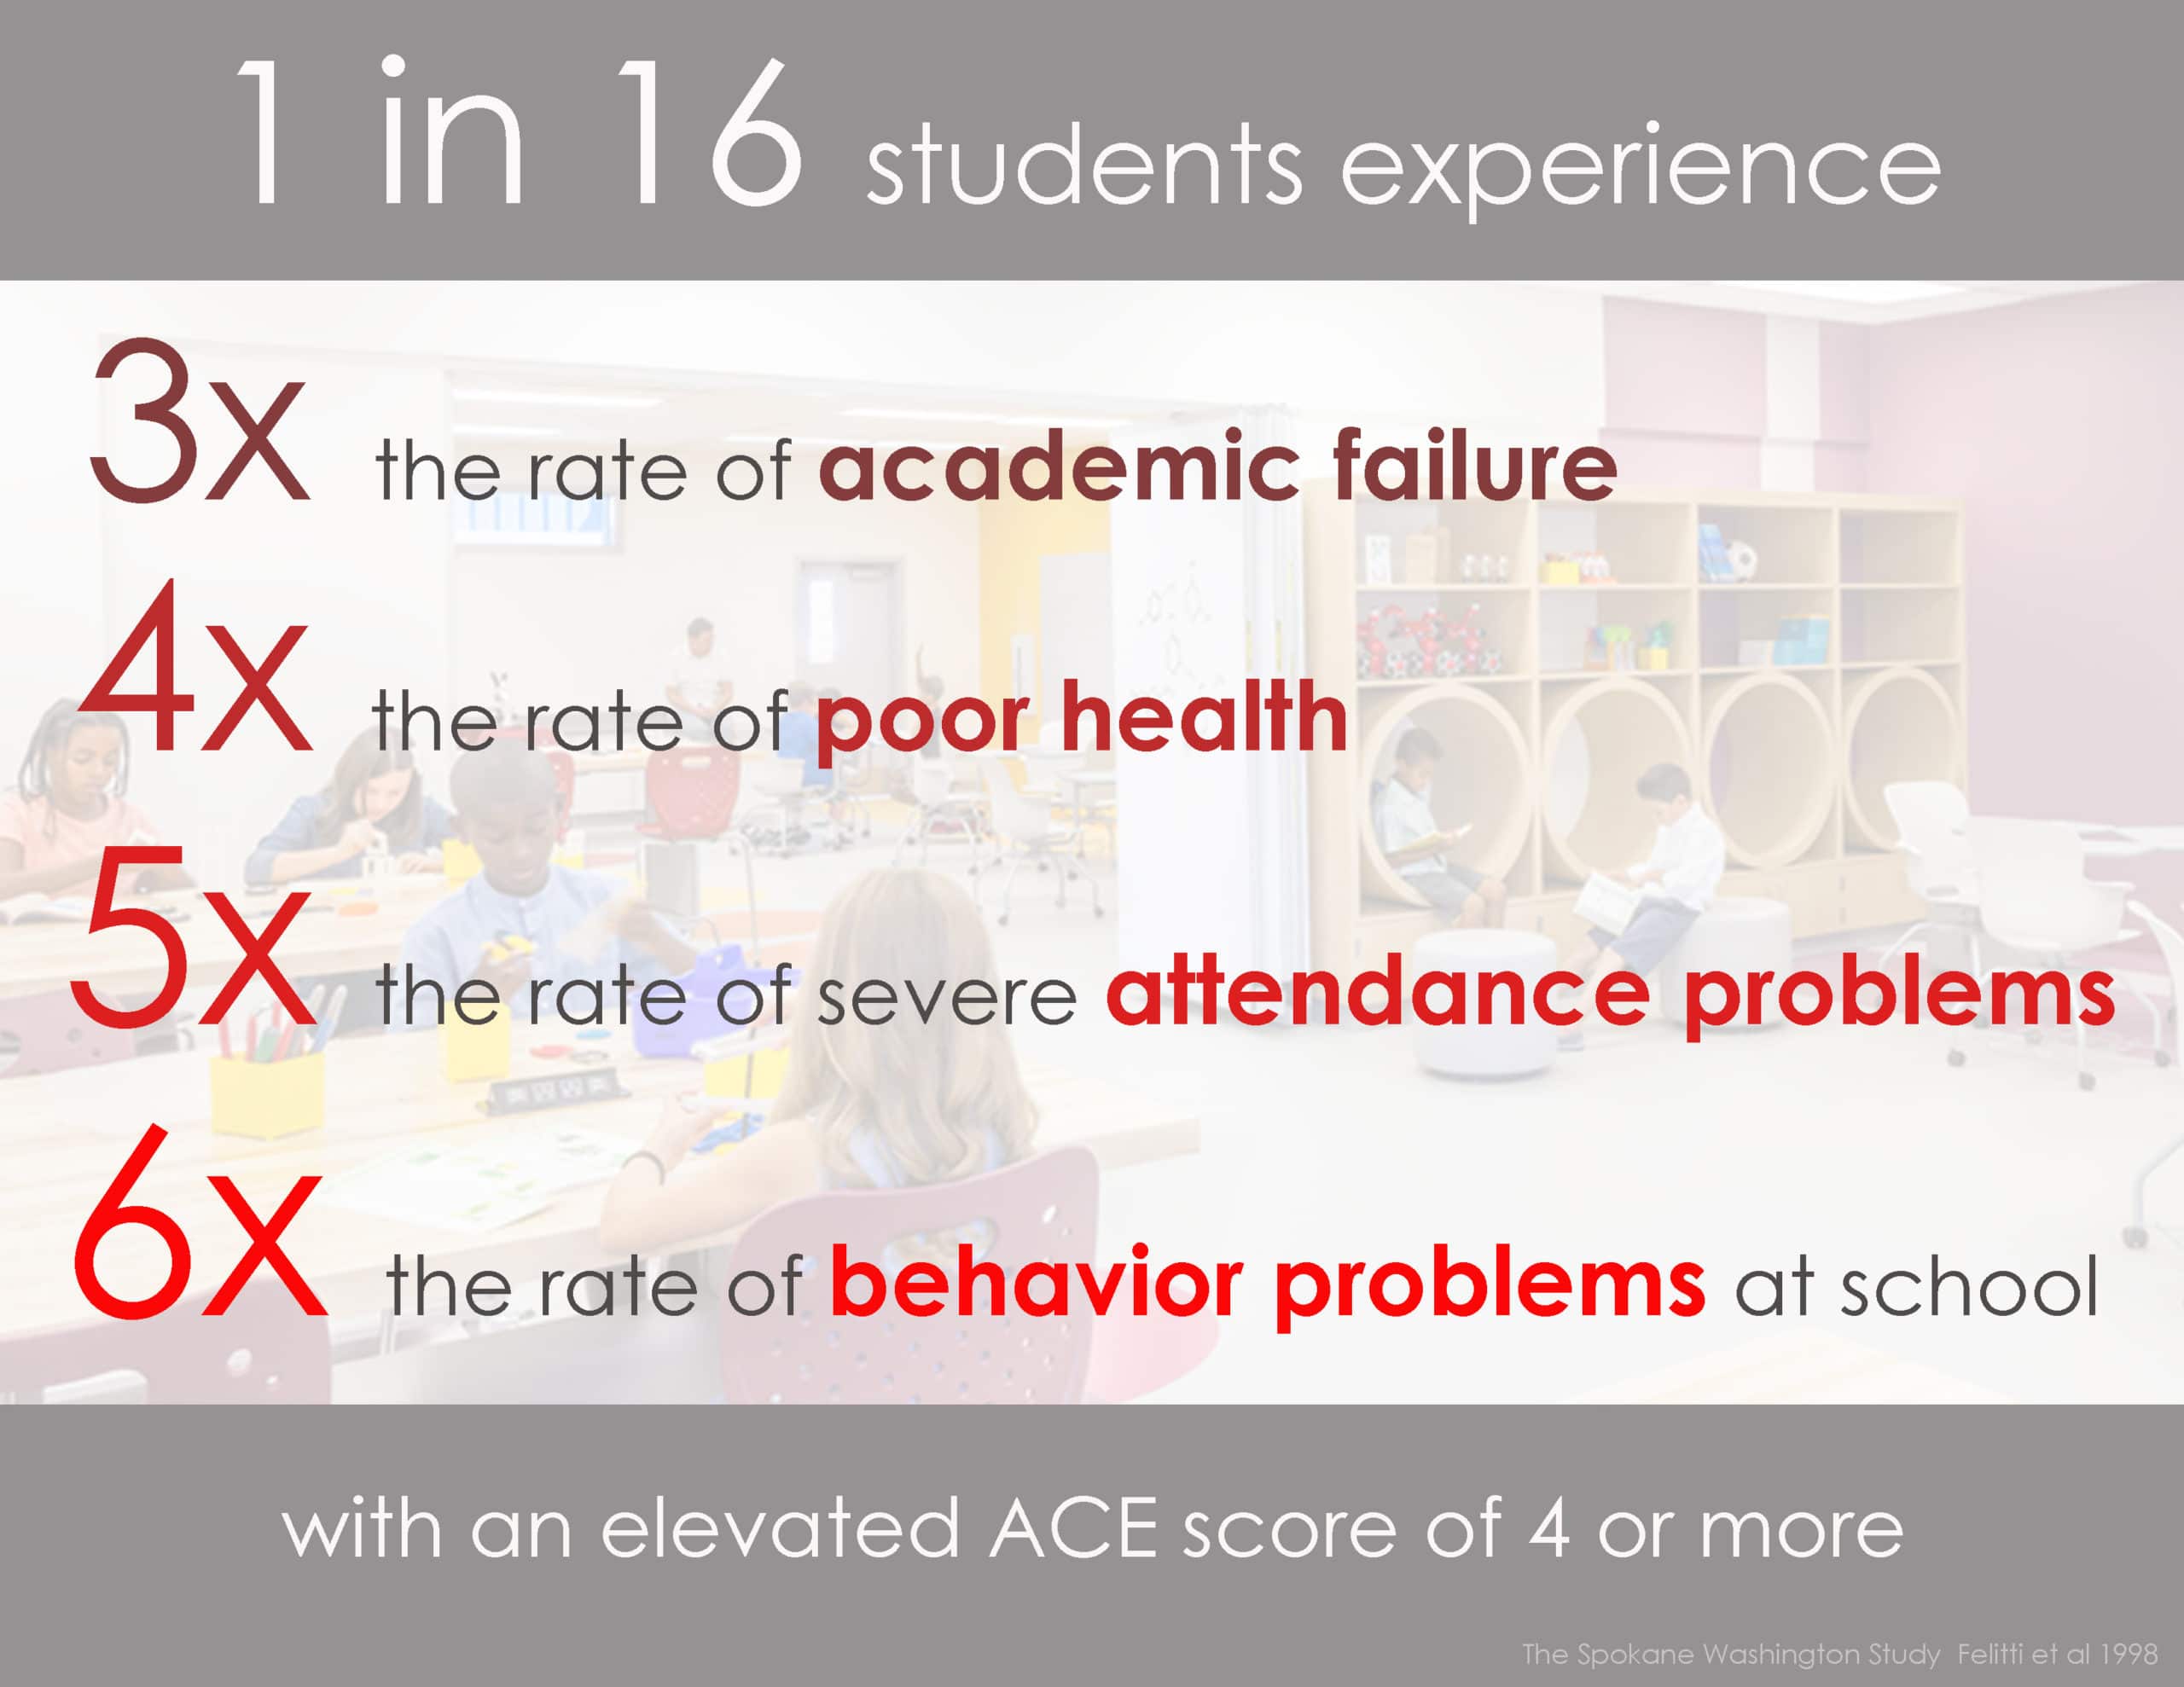 1 in 16 students experience